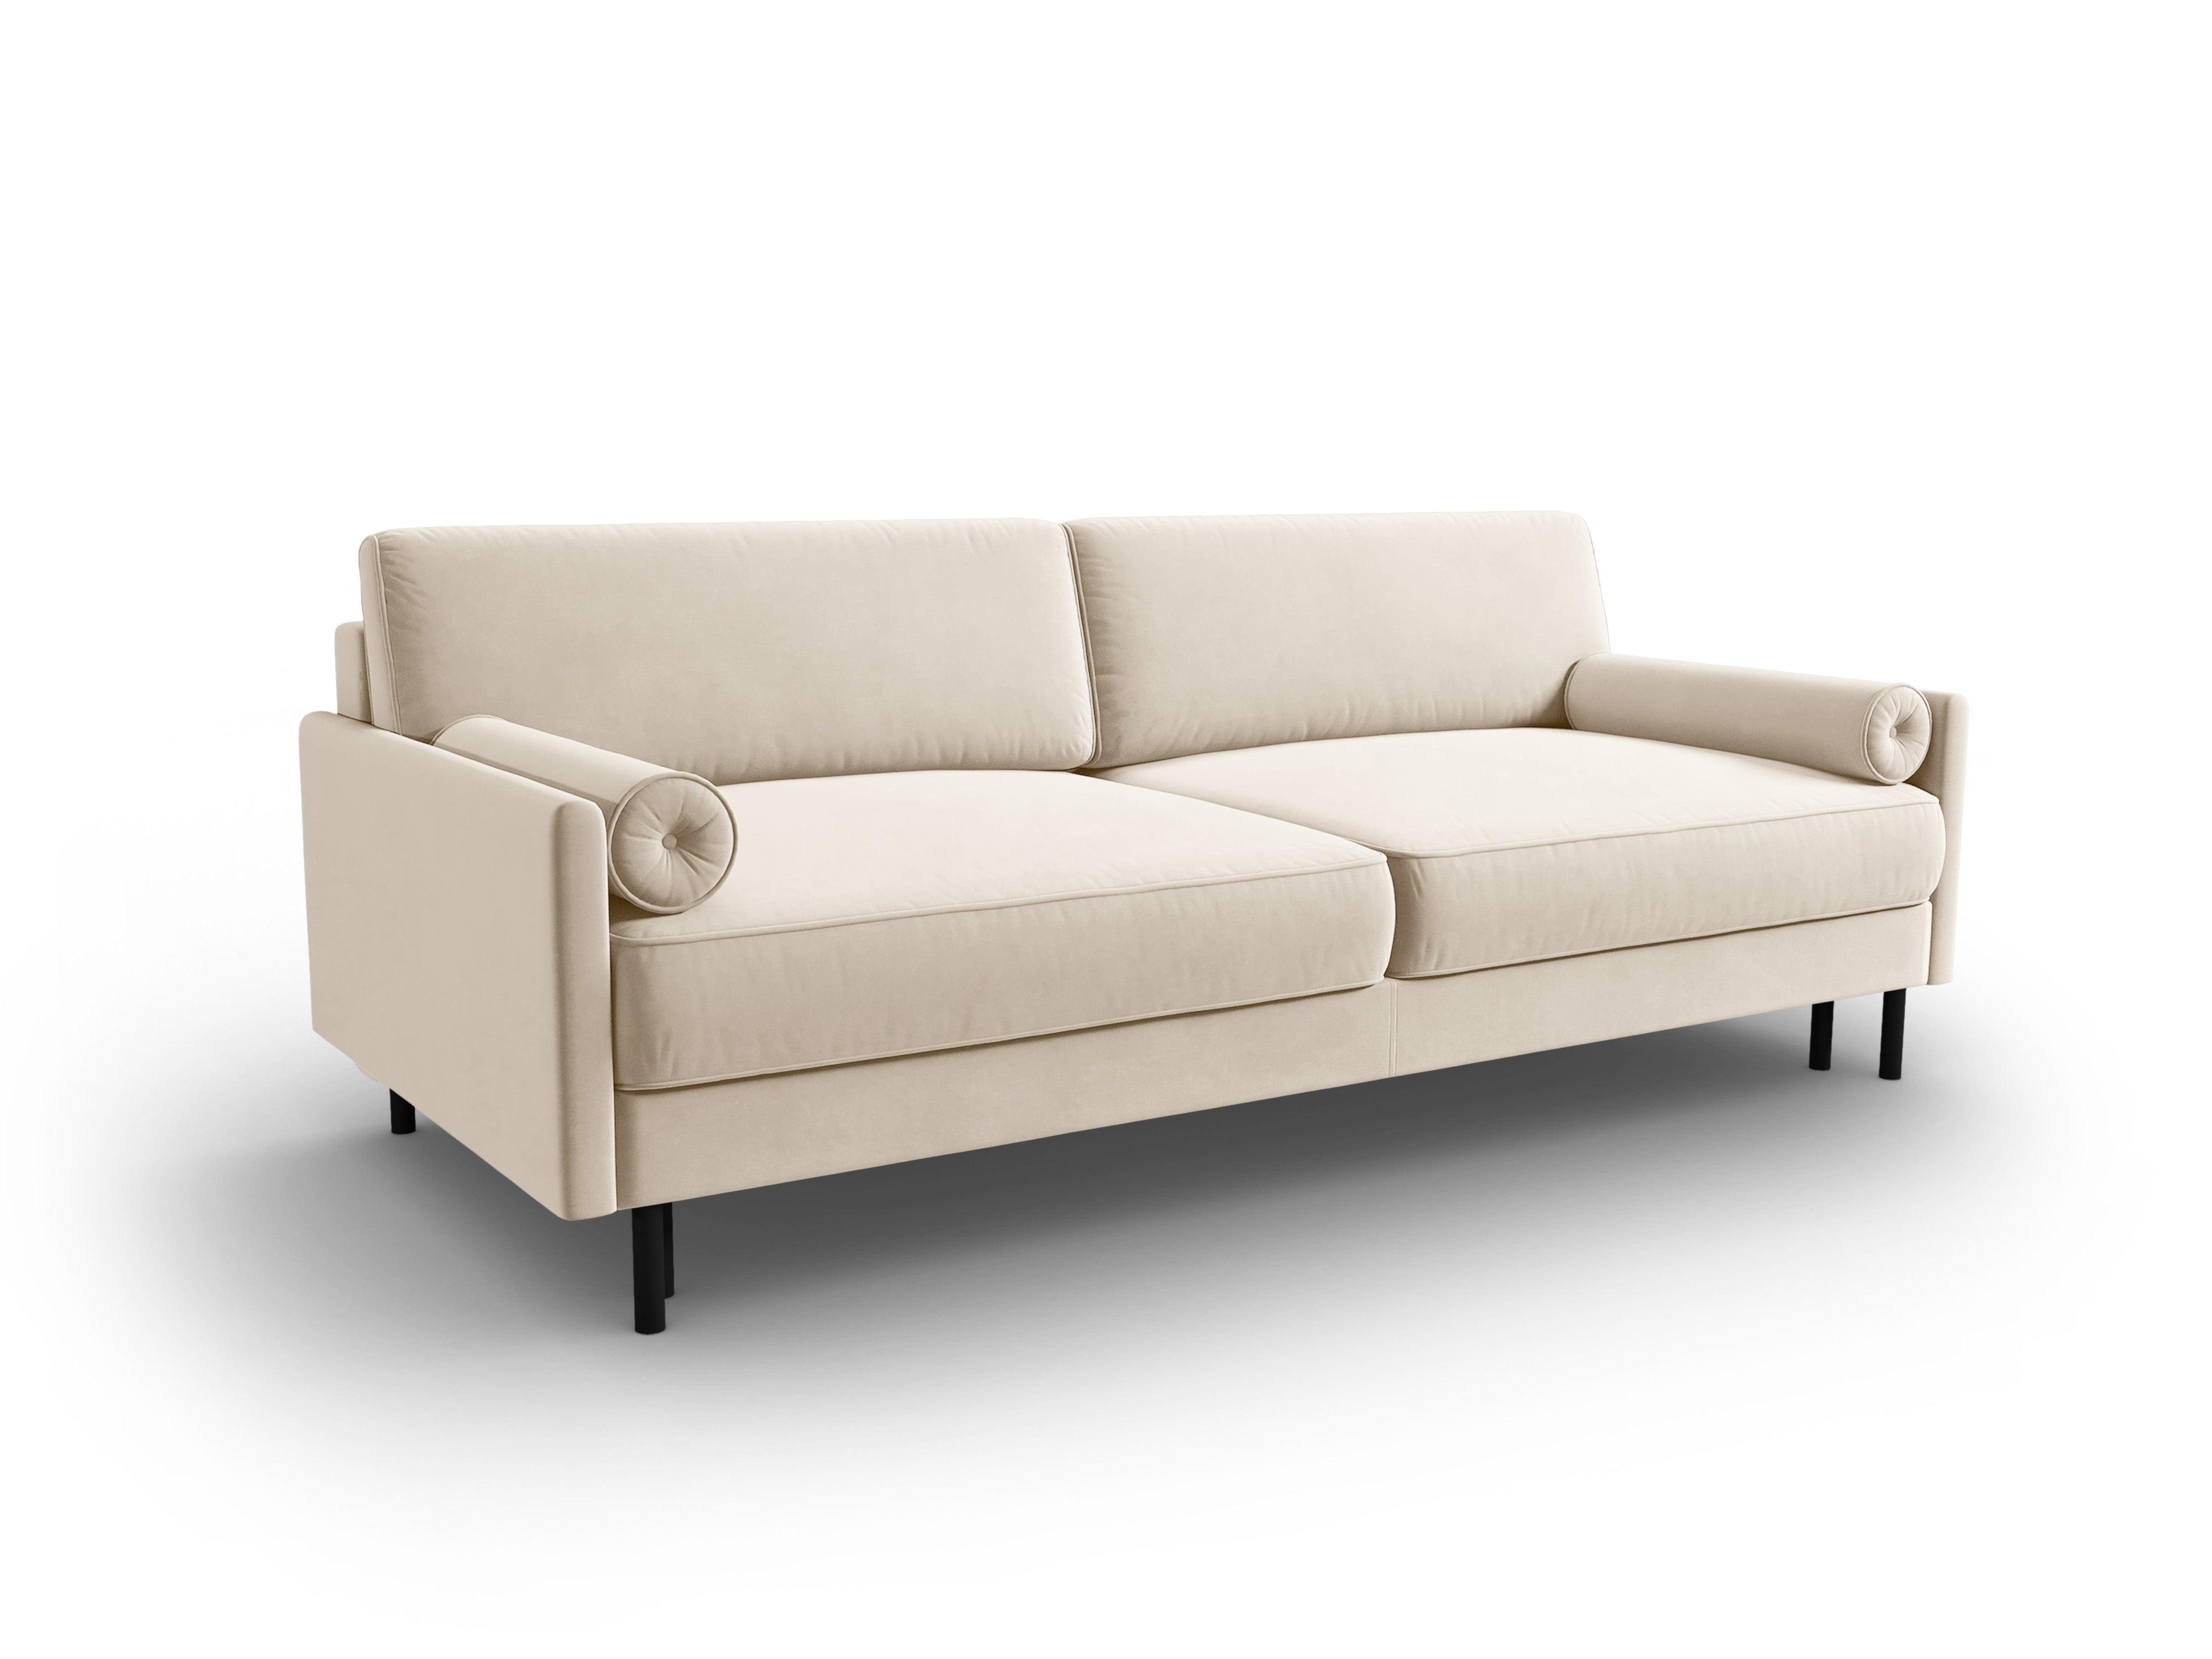 Velvet Sofa With Bed Function And Box, "Scott", 3 Seats, 212x97x87
Made in Europe, Micadoni, Eye on Design